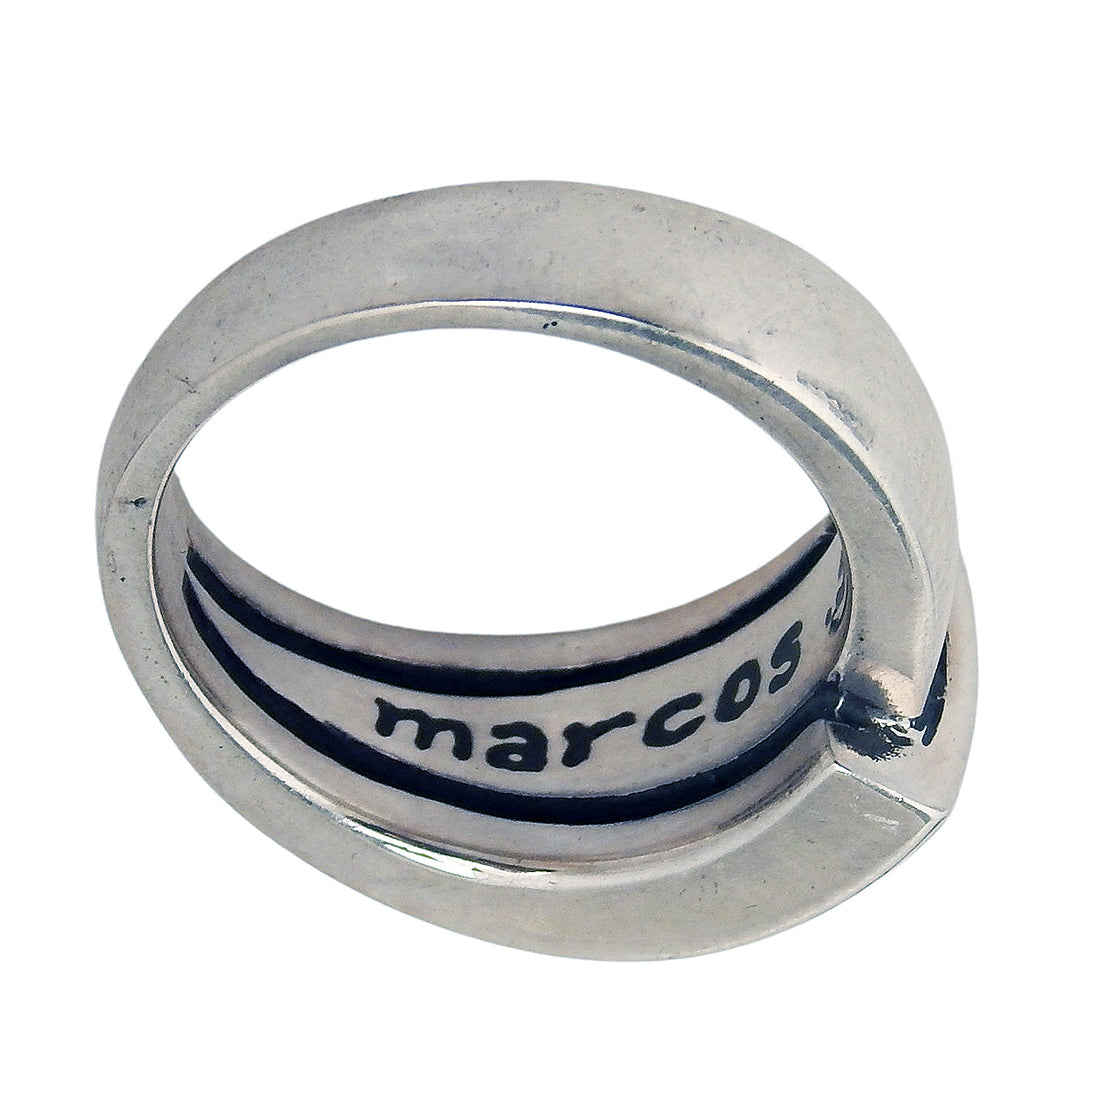 MARCOS - "SCROLL" Inscribed Sterling Silver Ring